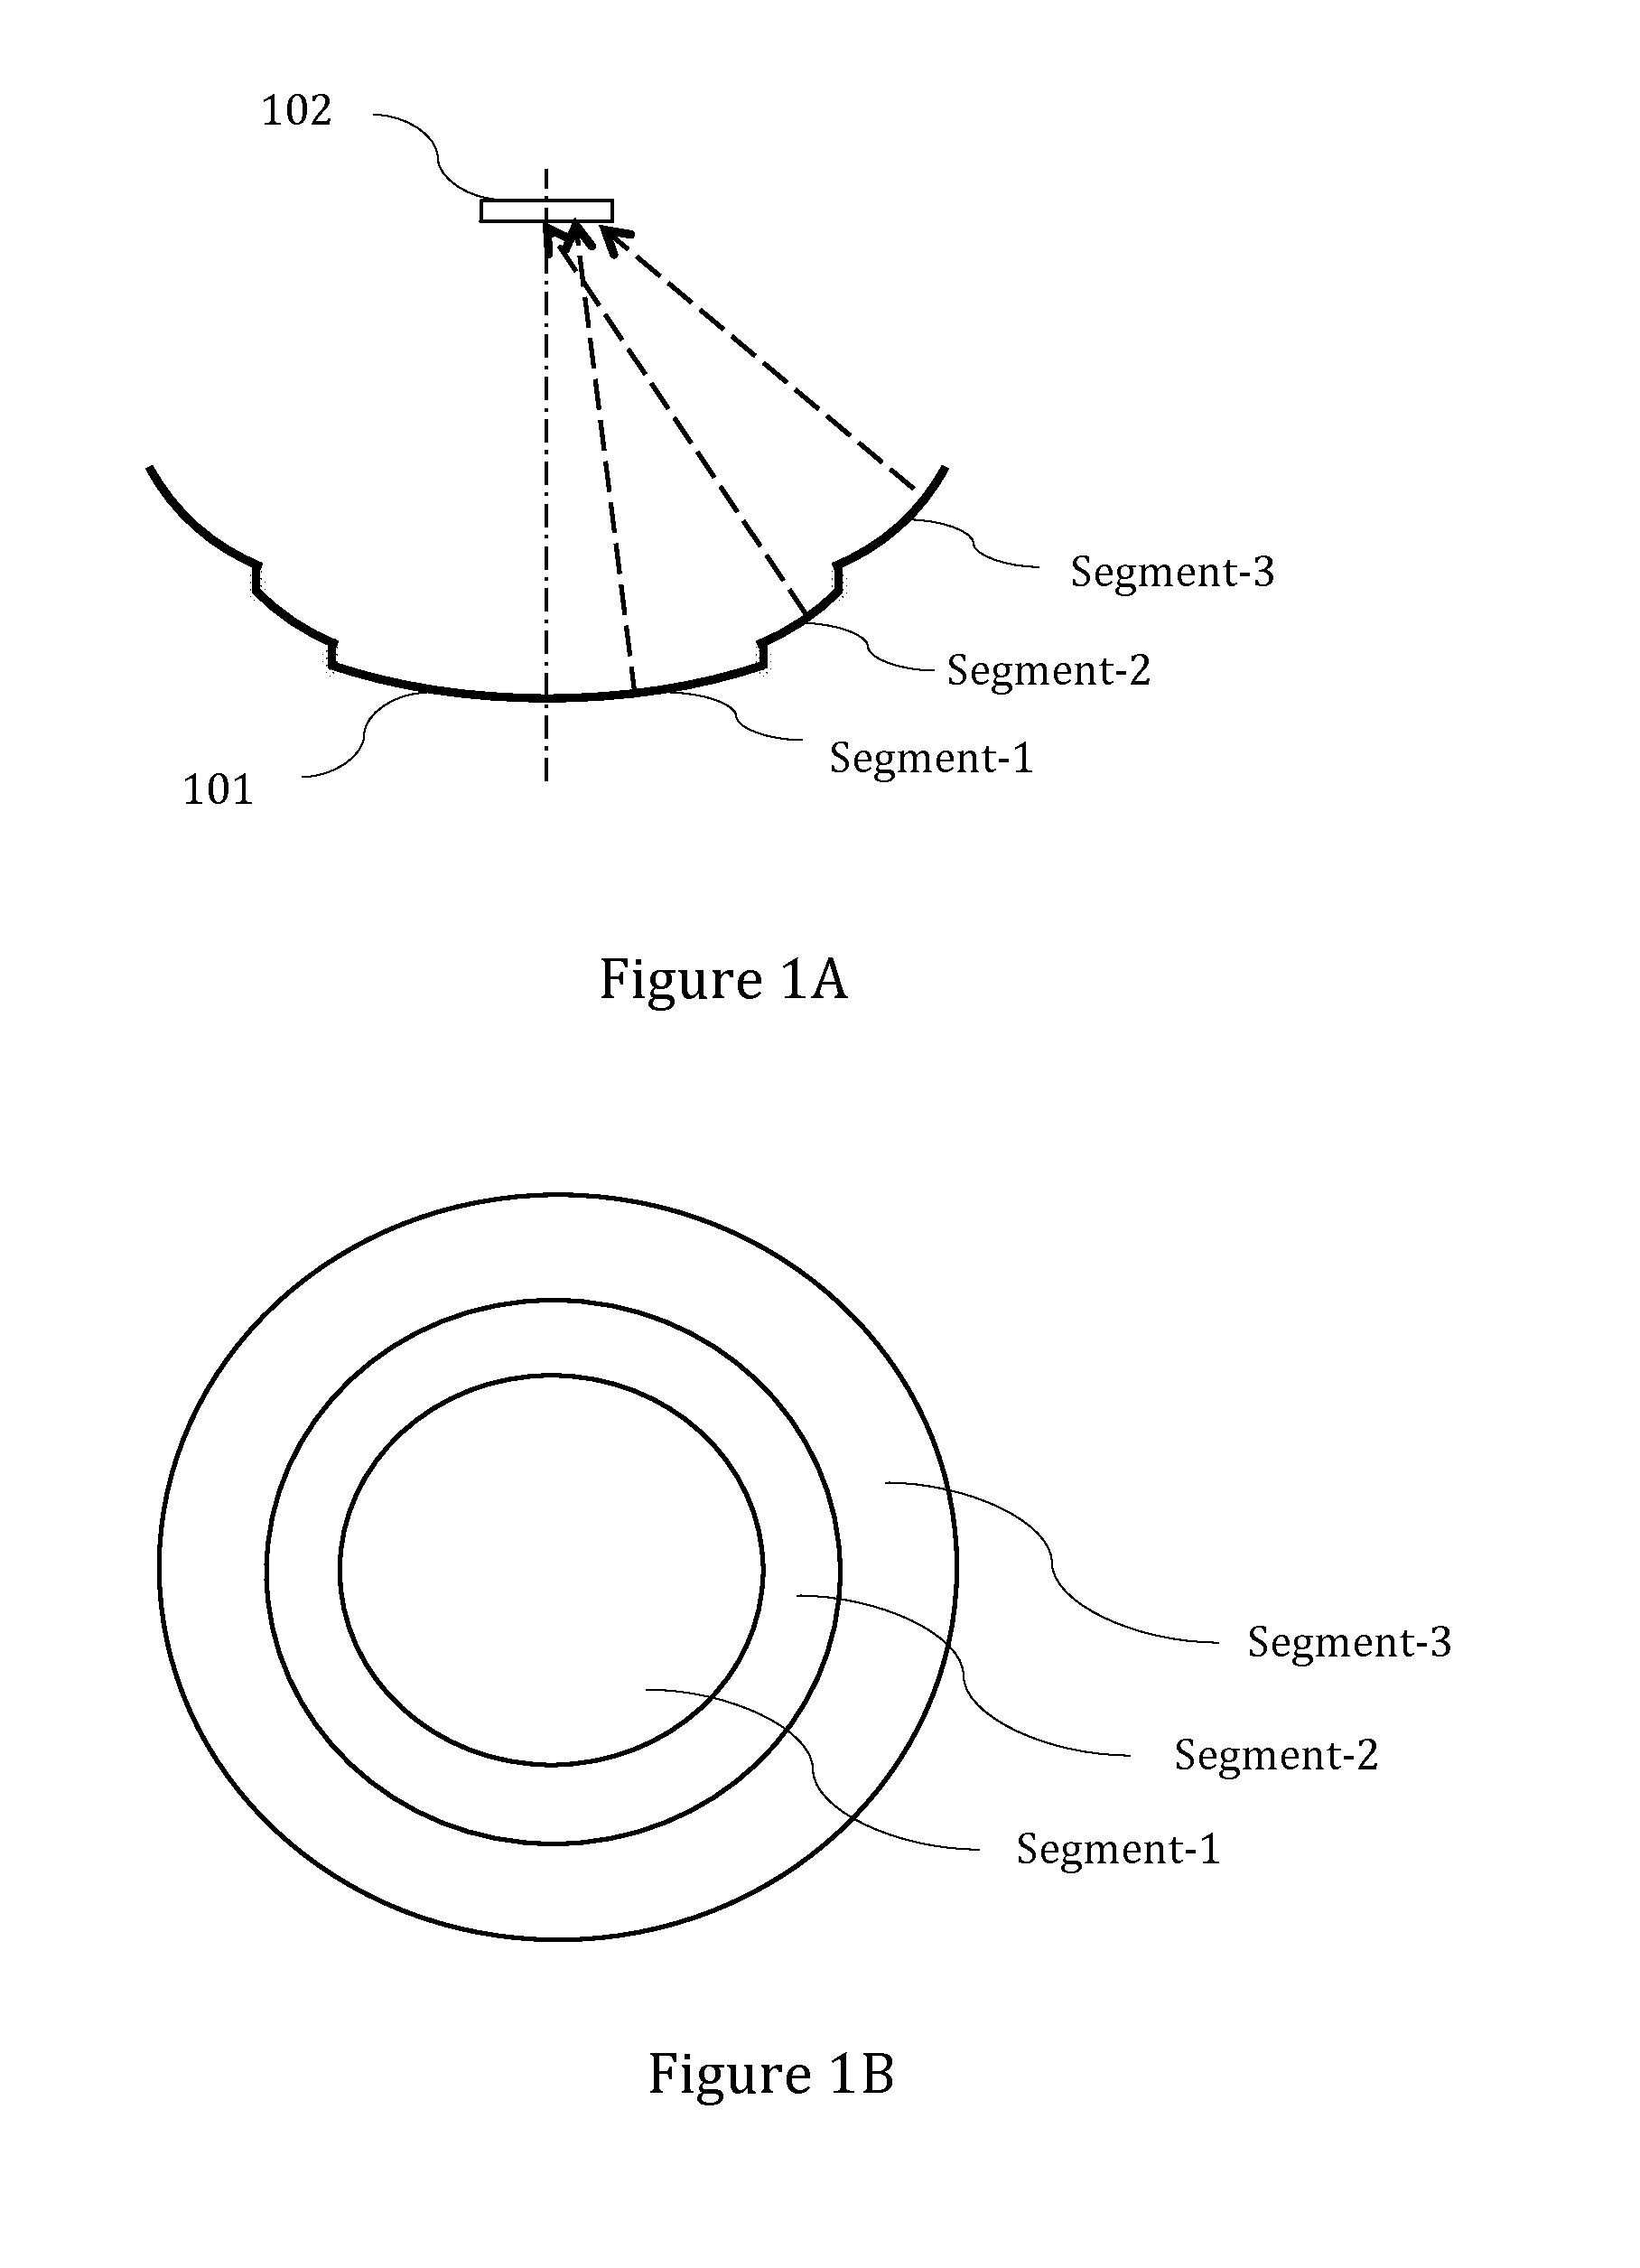 Methods and apparatus for solar energy concentration and conversion